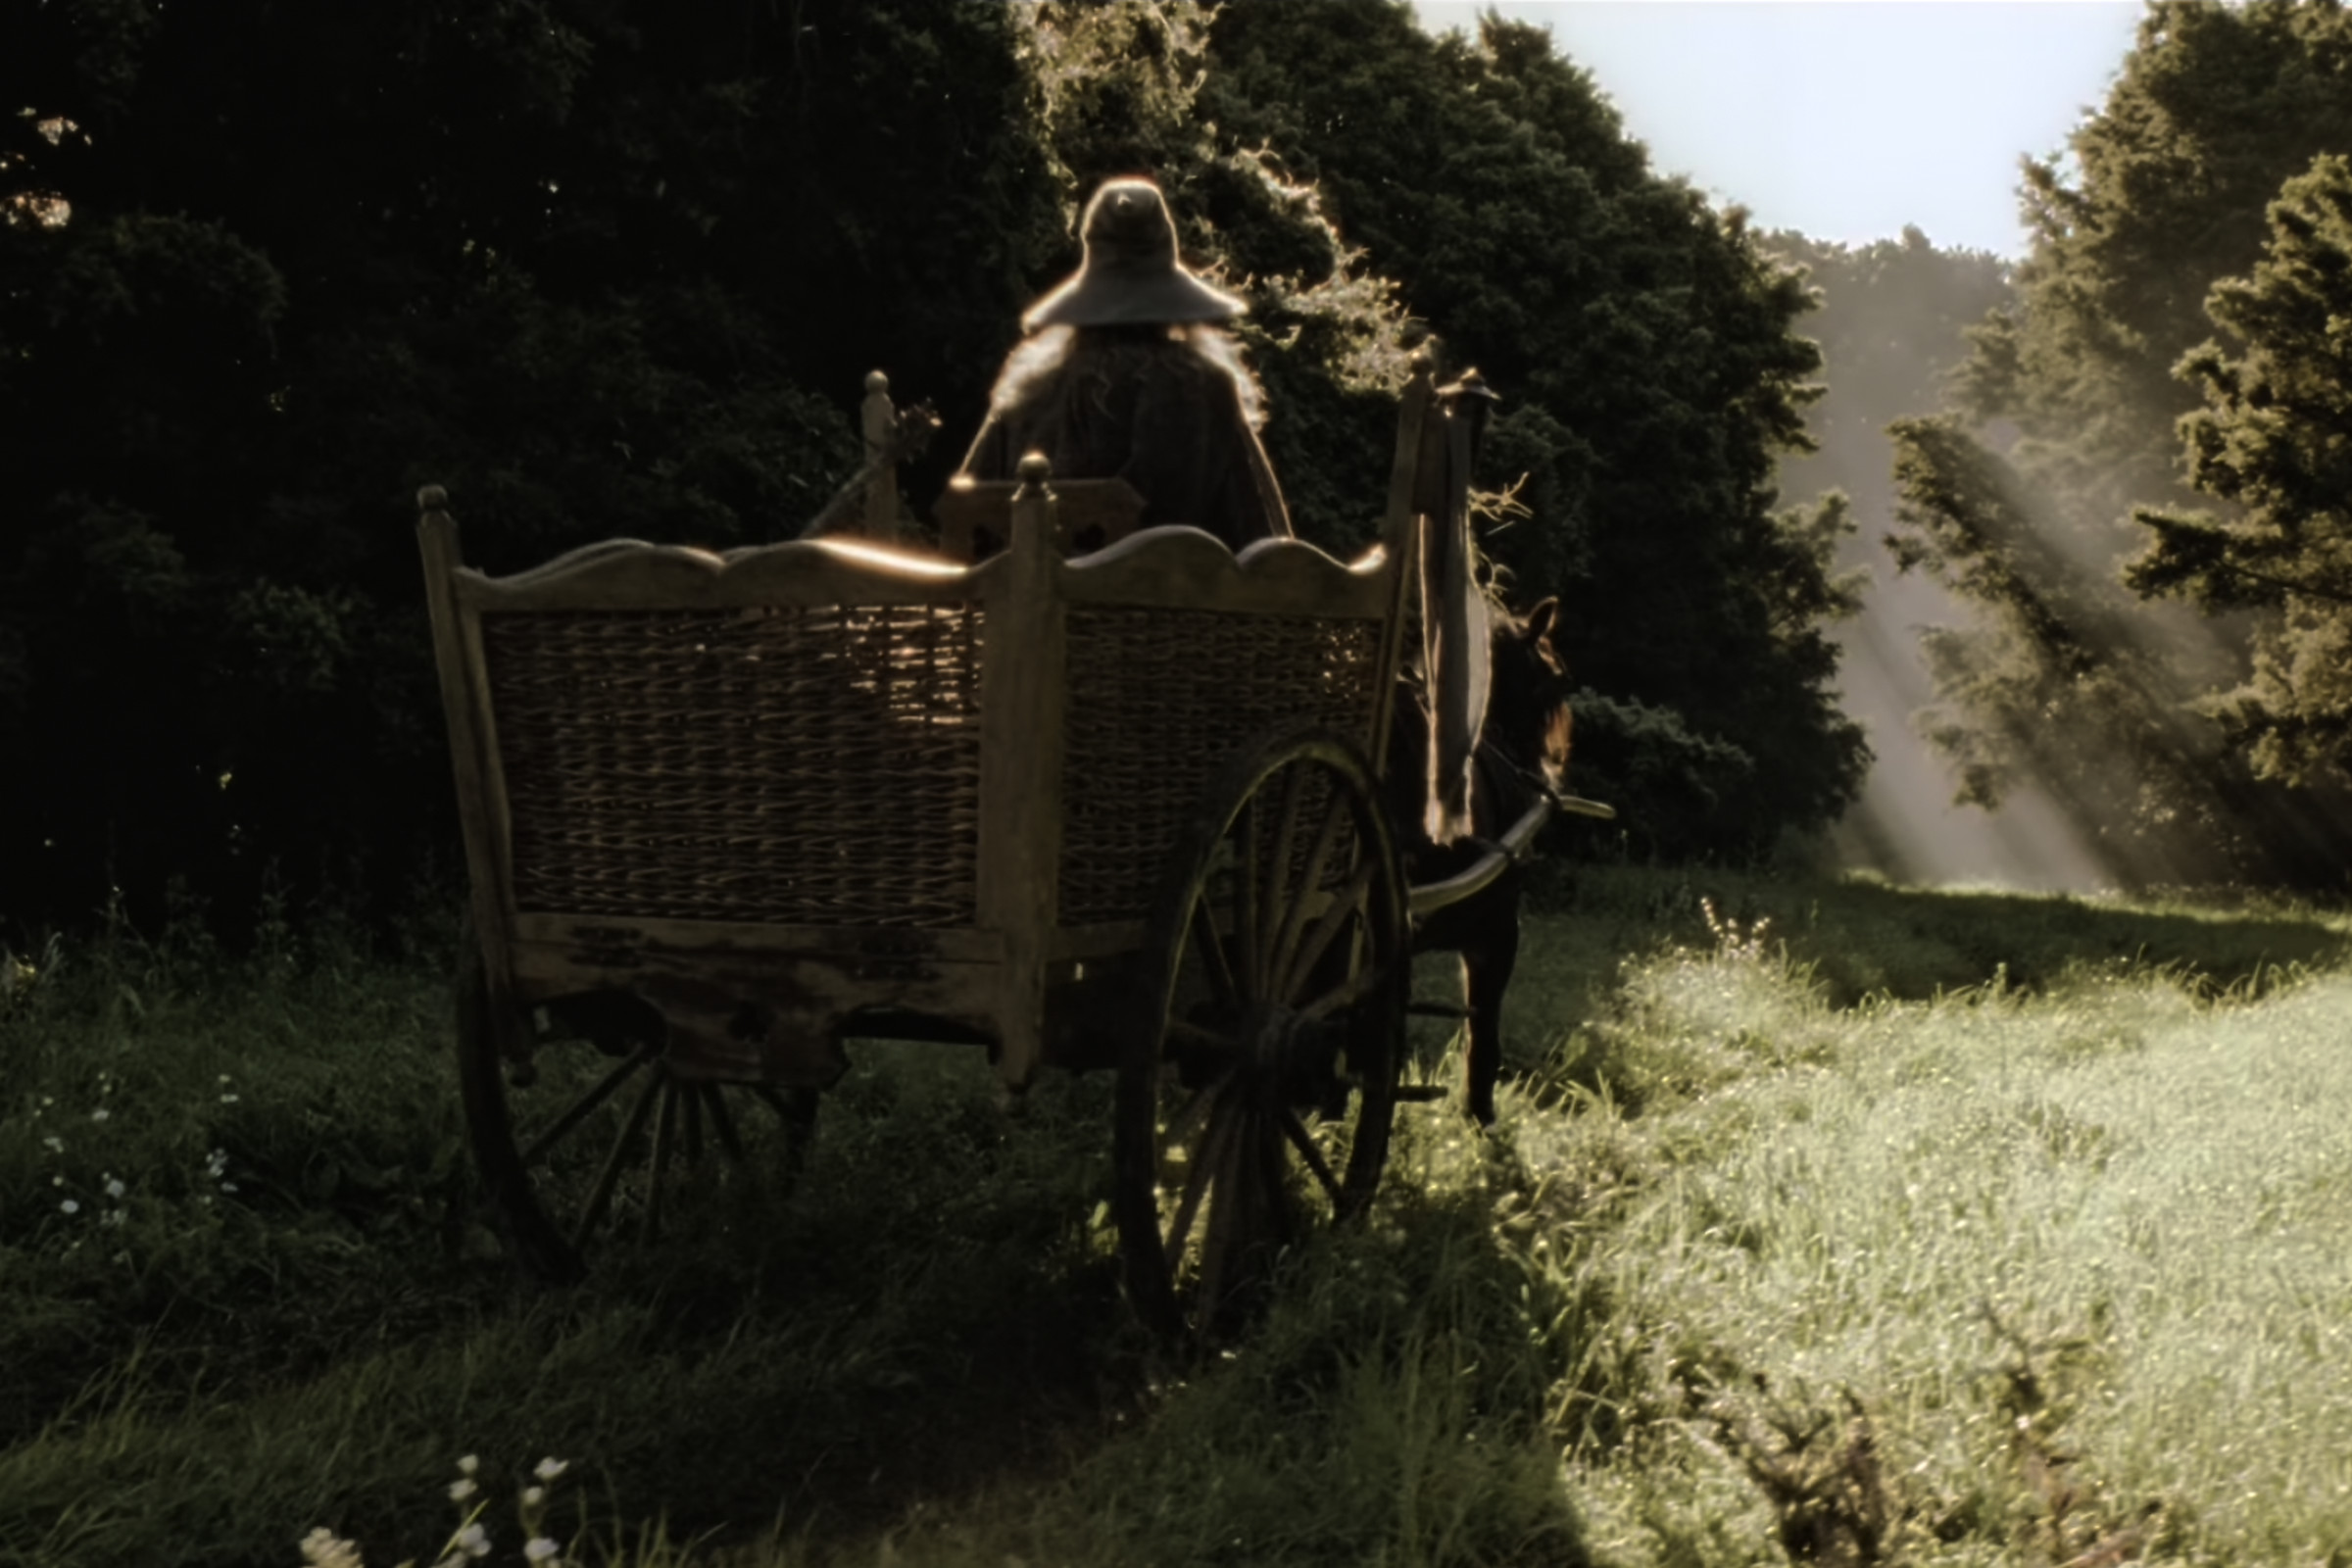 Frame from Lord of the Rings: Fellowship of the Ring, with Gandalf riding in a cart.